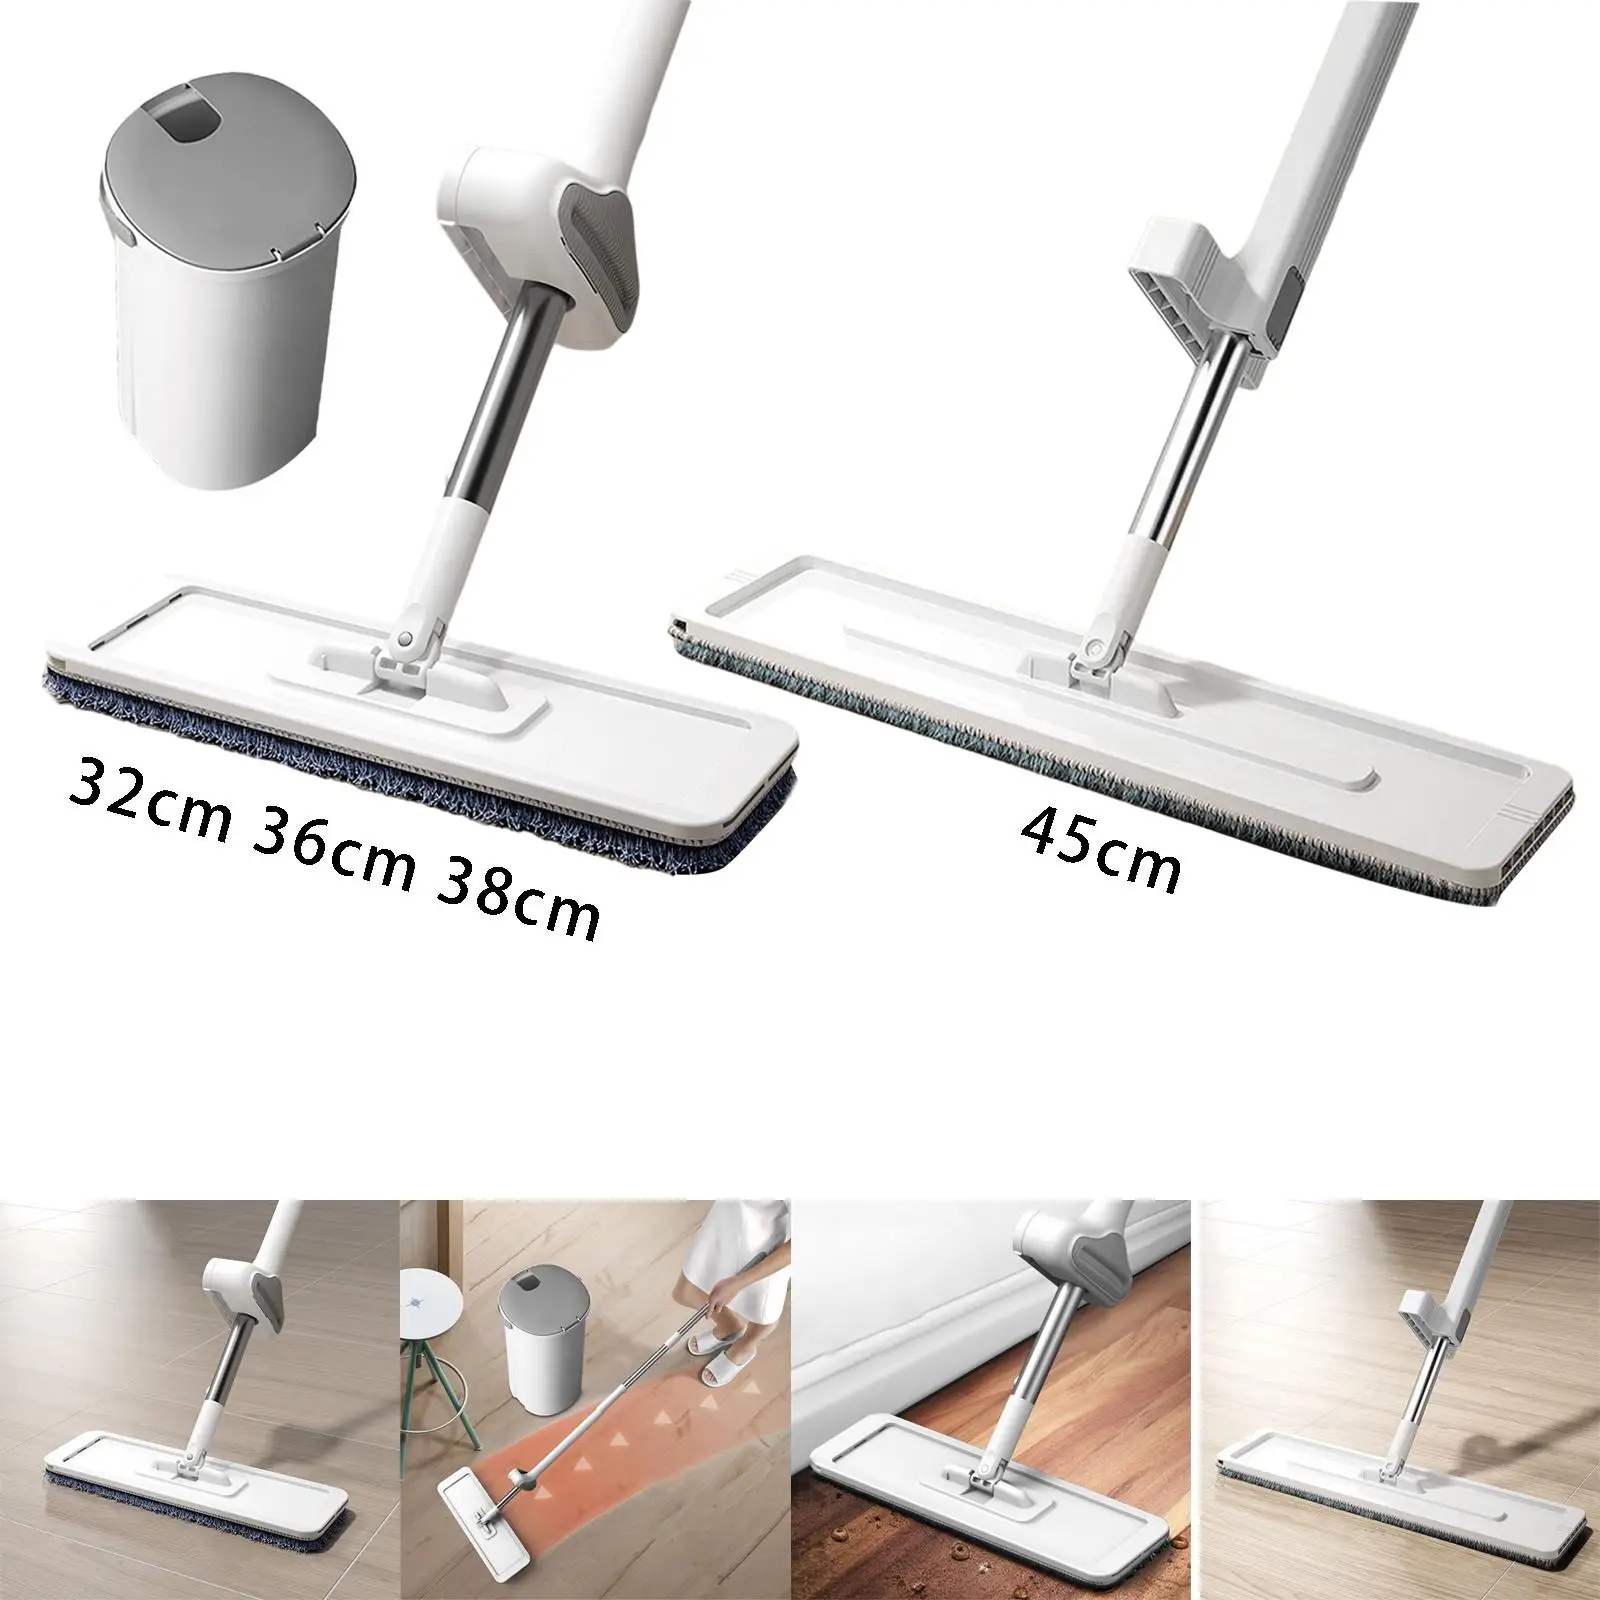 Hand Free Flat Mop Flexible Wet or Dry Scrubbers Household Supplies Large Panel Slim Floor Mop Microfiber Mop for Ceiling Home